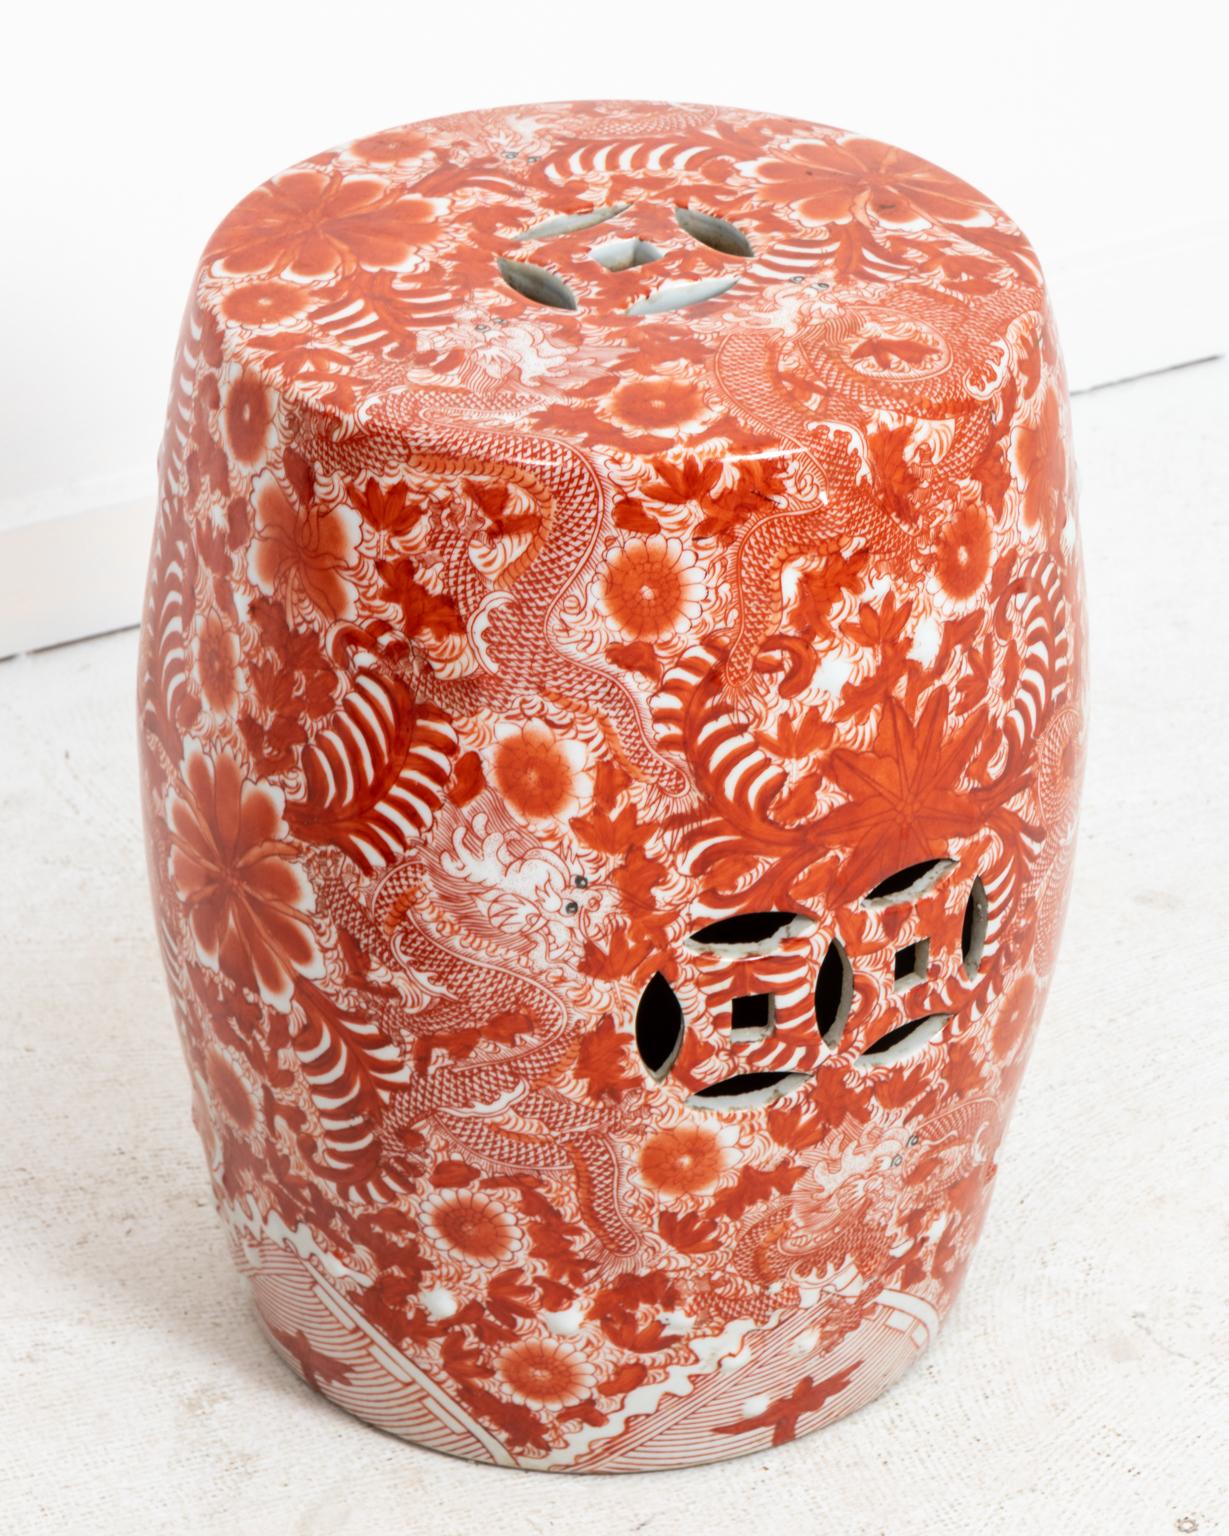 Pair of vintage Chinese red floral dragon hand painted ceramic garden stools, circa 1960s. Made in China. Please note of wear consistent with age.